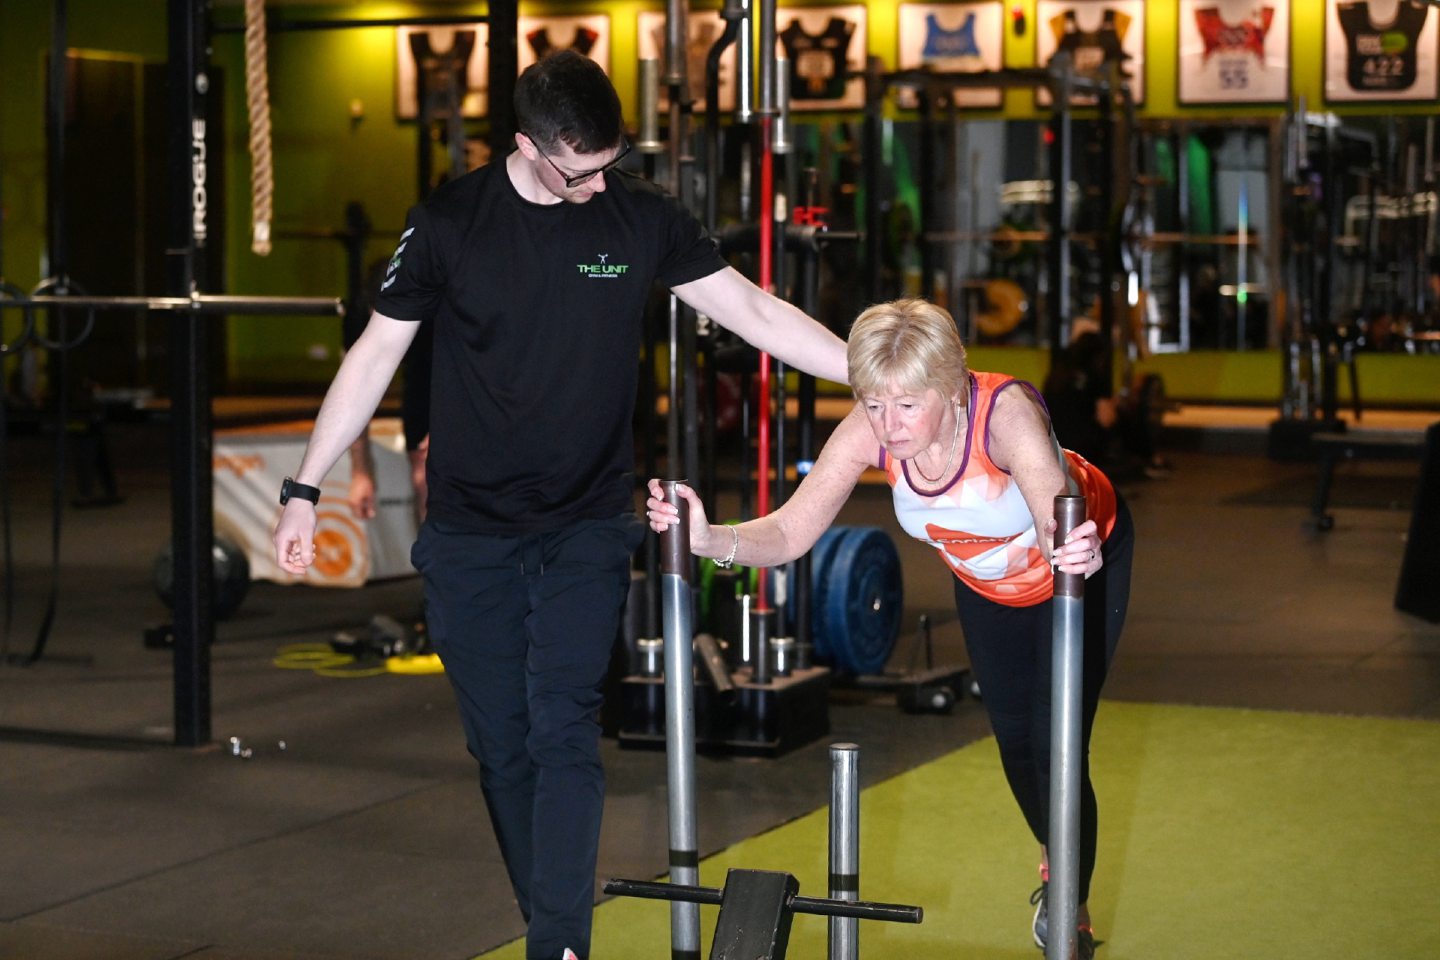 A lot of the exercises have real-world equivalents, helping with Fiona's balance and coordination. Image: Darrell Benns/ DC Thomson